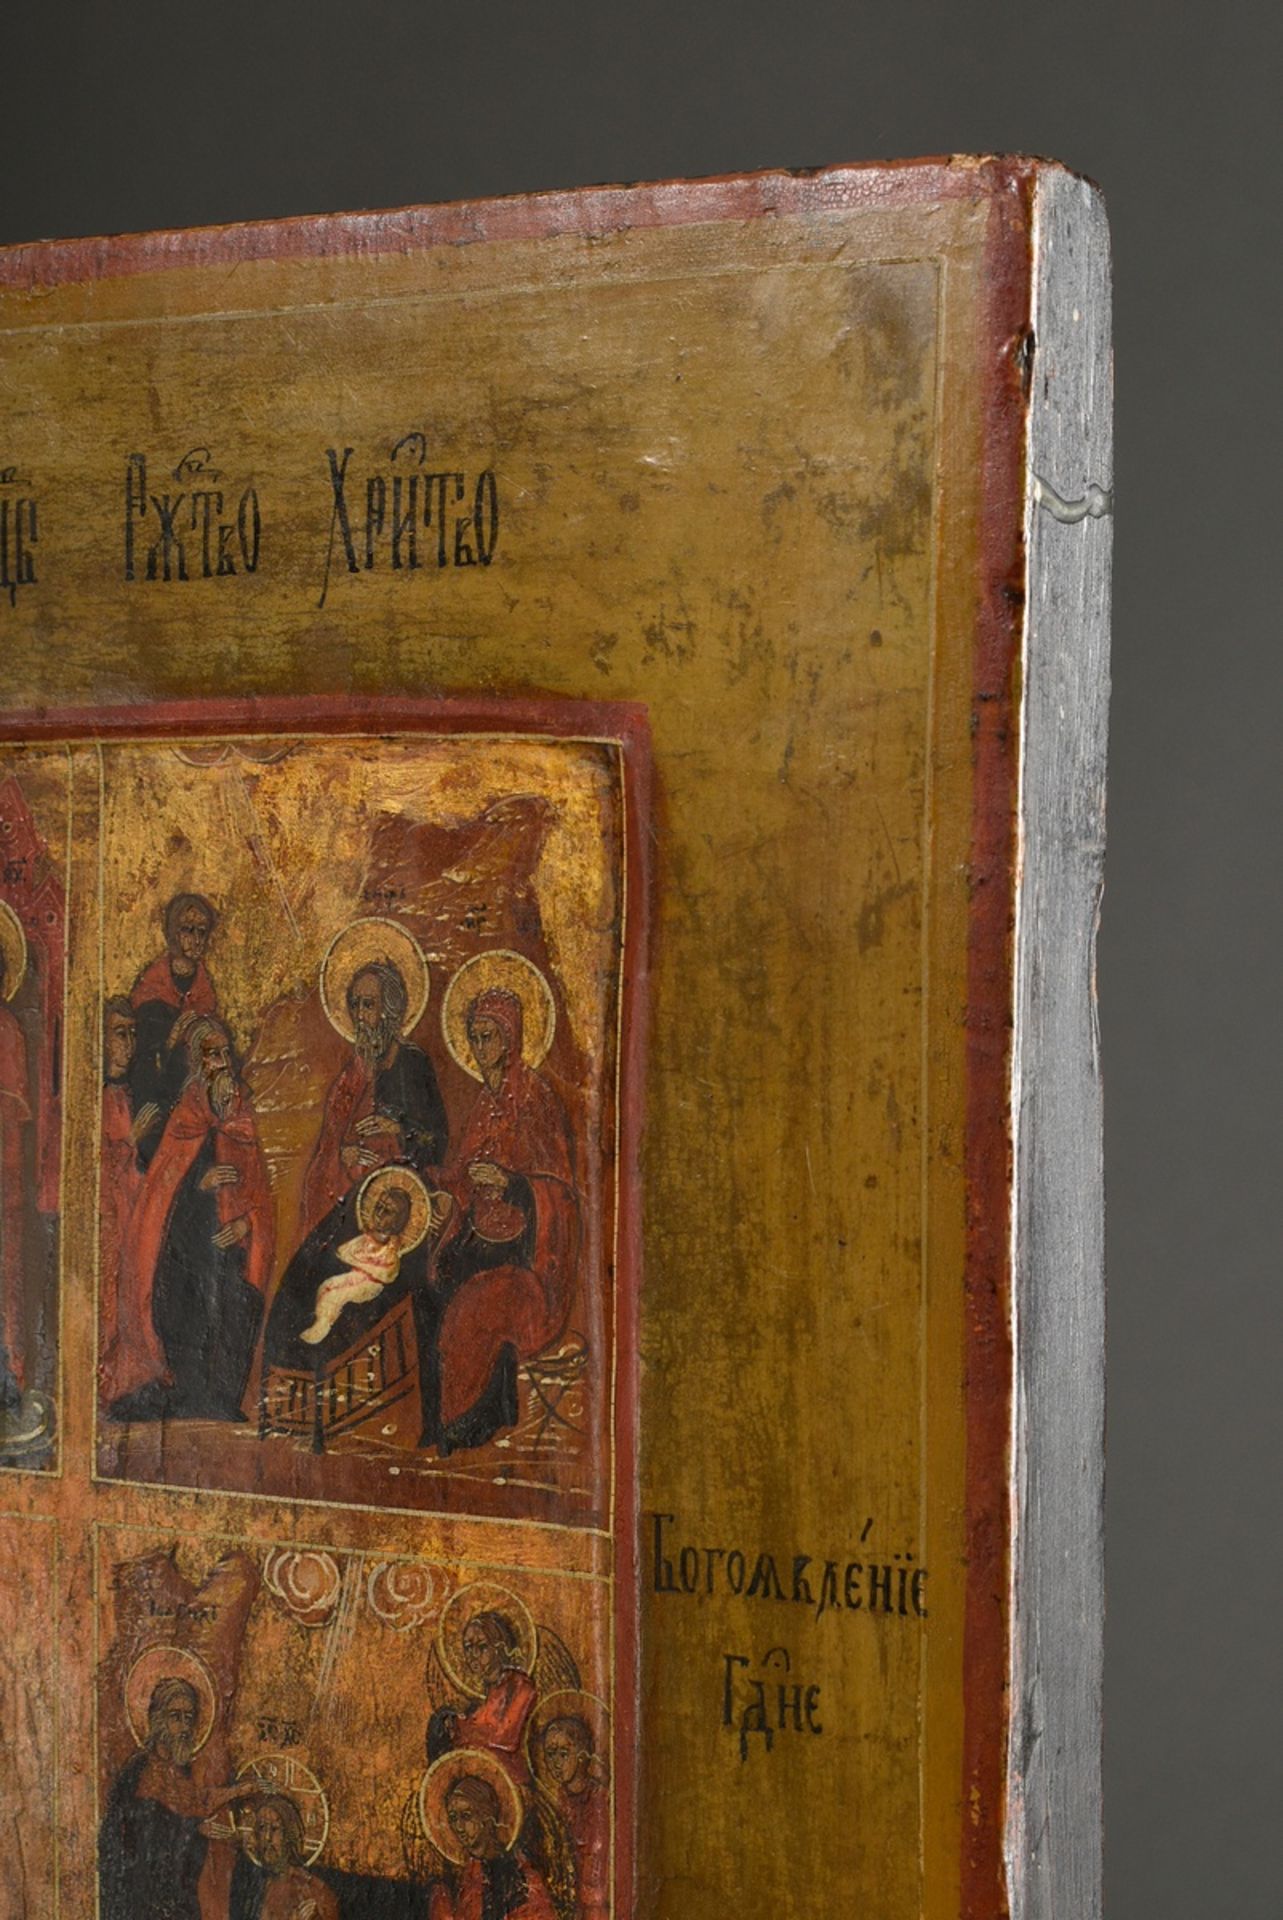 Central Russian feast day icon "Easter events, Ascension and Resurrection of Christ" in the central - Image 3 of 8